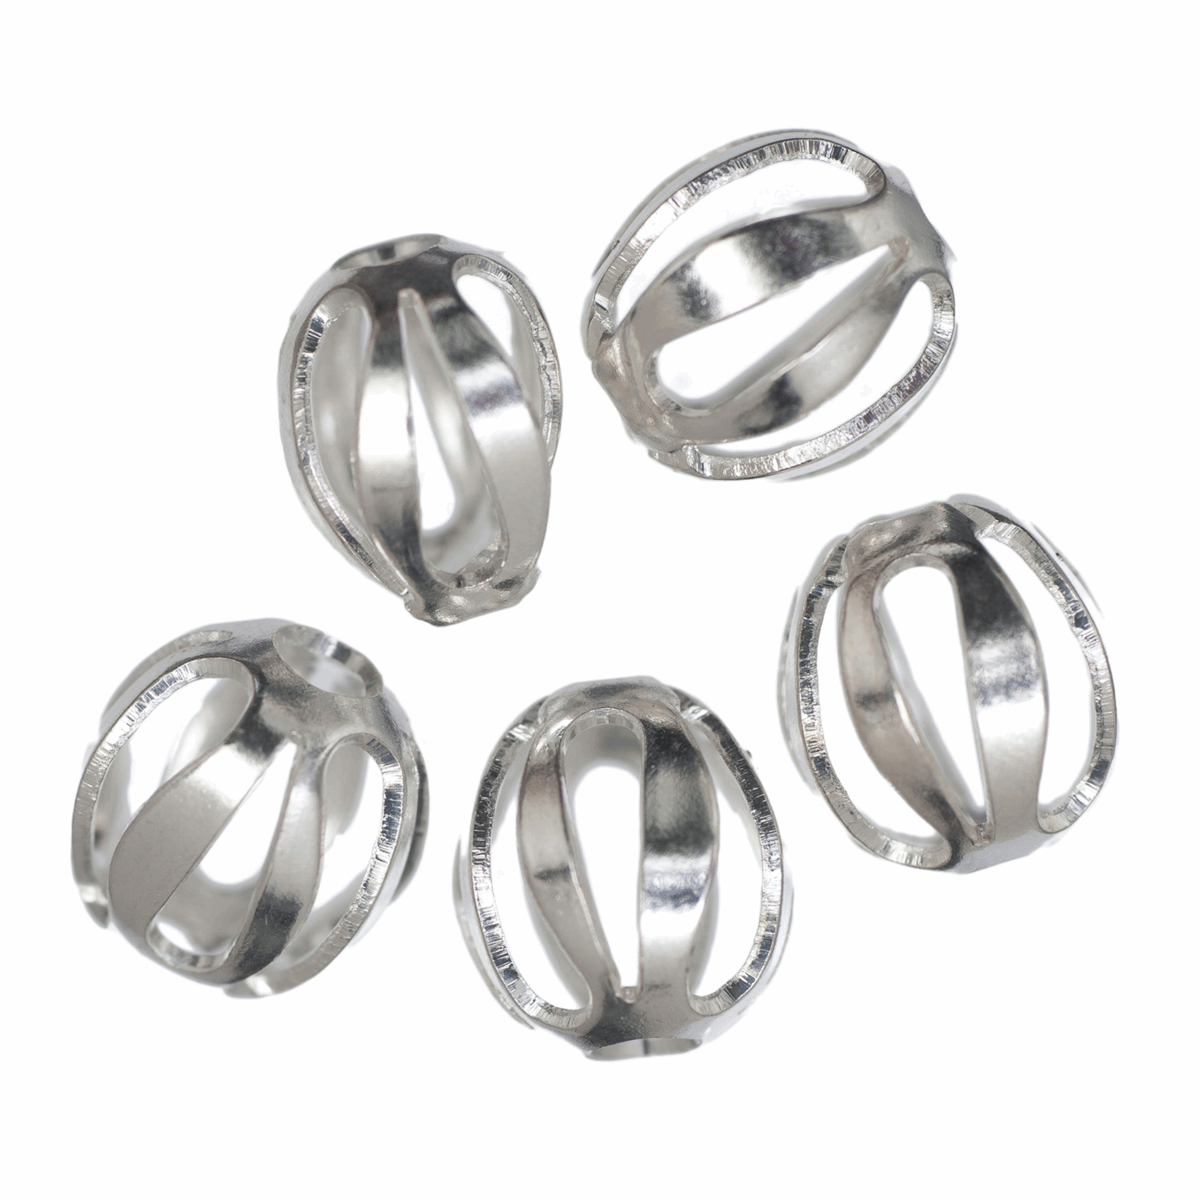 Trimits Oval Filigree Silver Plated Beads - 7mm (Pack of 5)